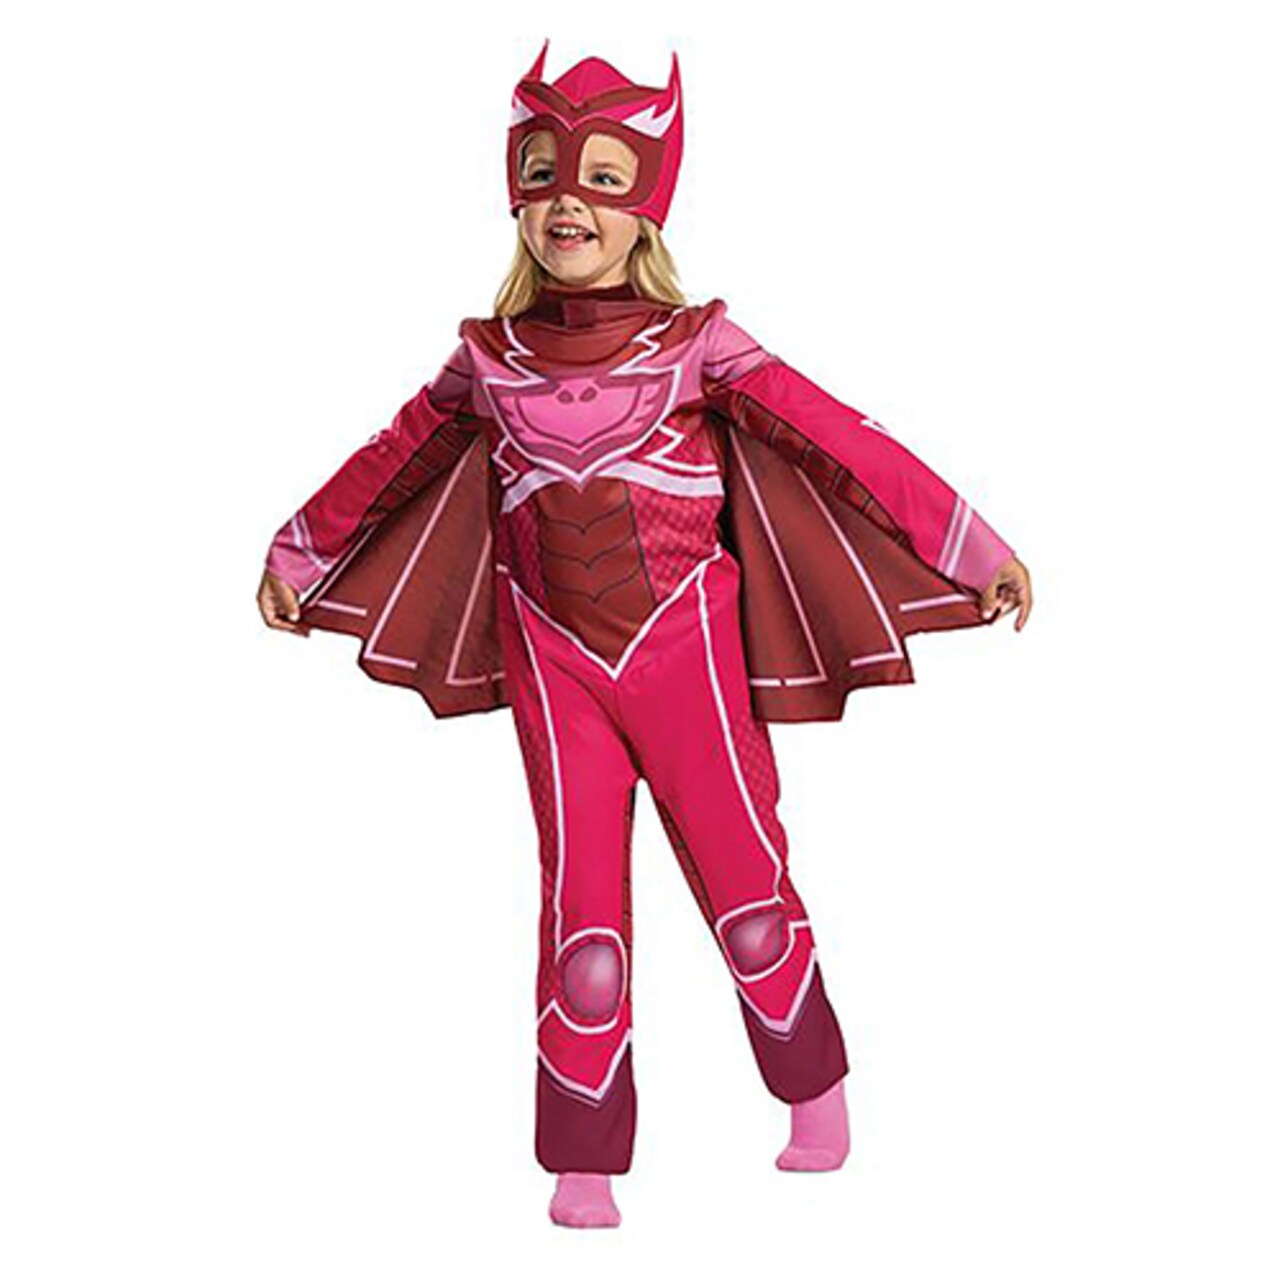 Pj Masks Owlette Classic Pink Jumpsuit Costume - Toddlers 18-24 Months